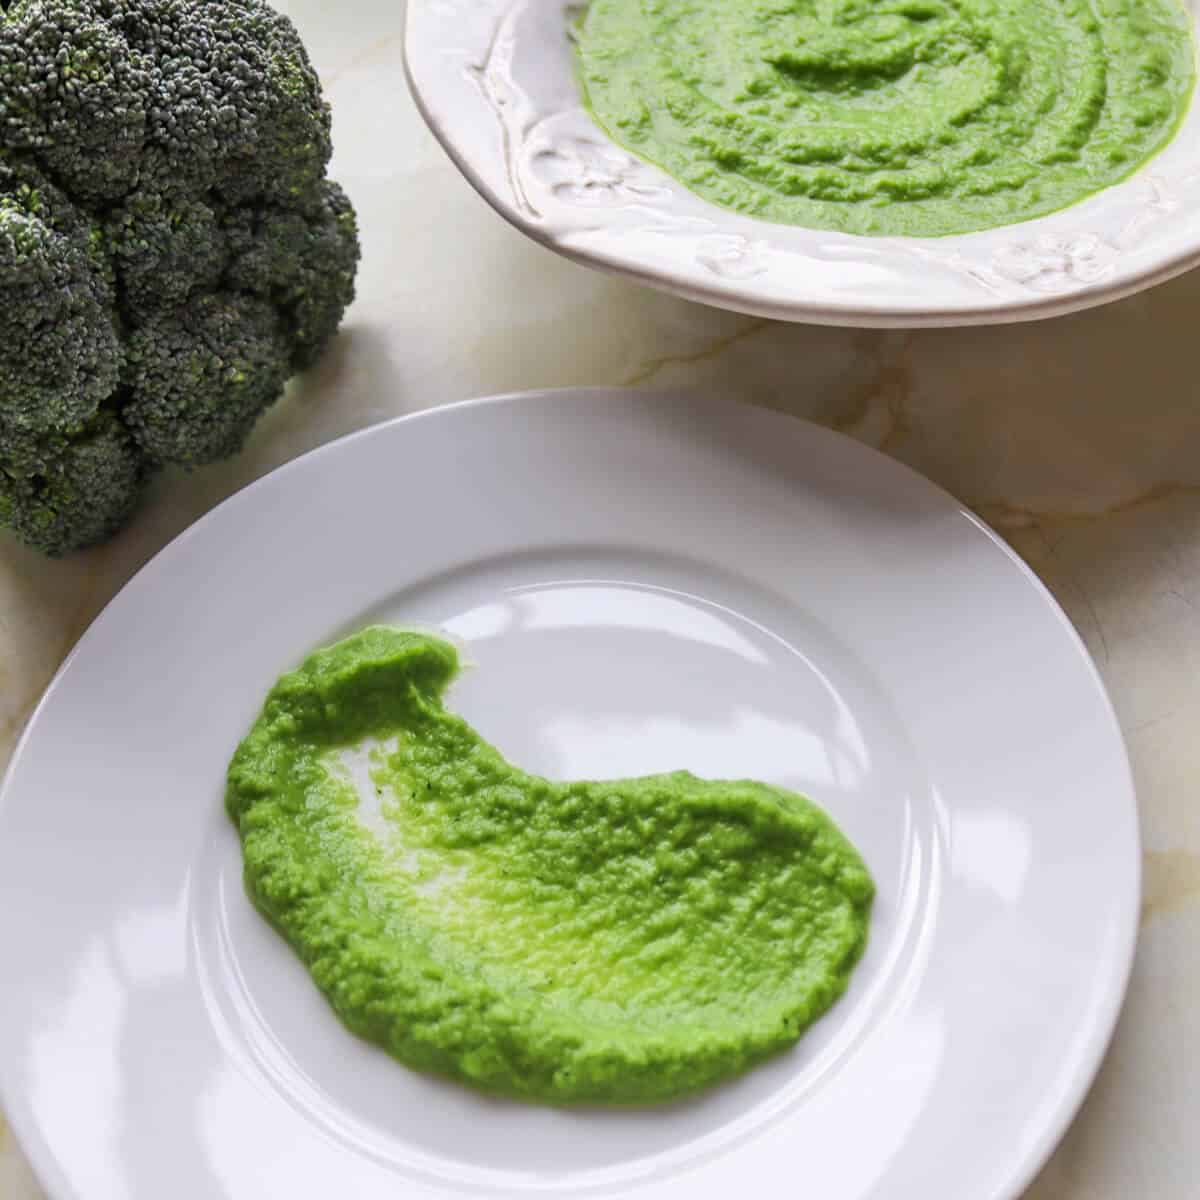 A plate with a smear of truffle broccoli asparagus puree on it and a whole head of broccoli